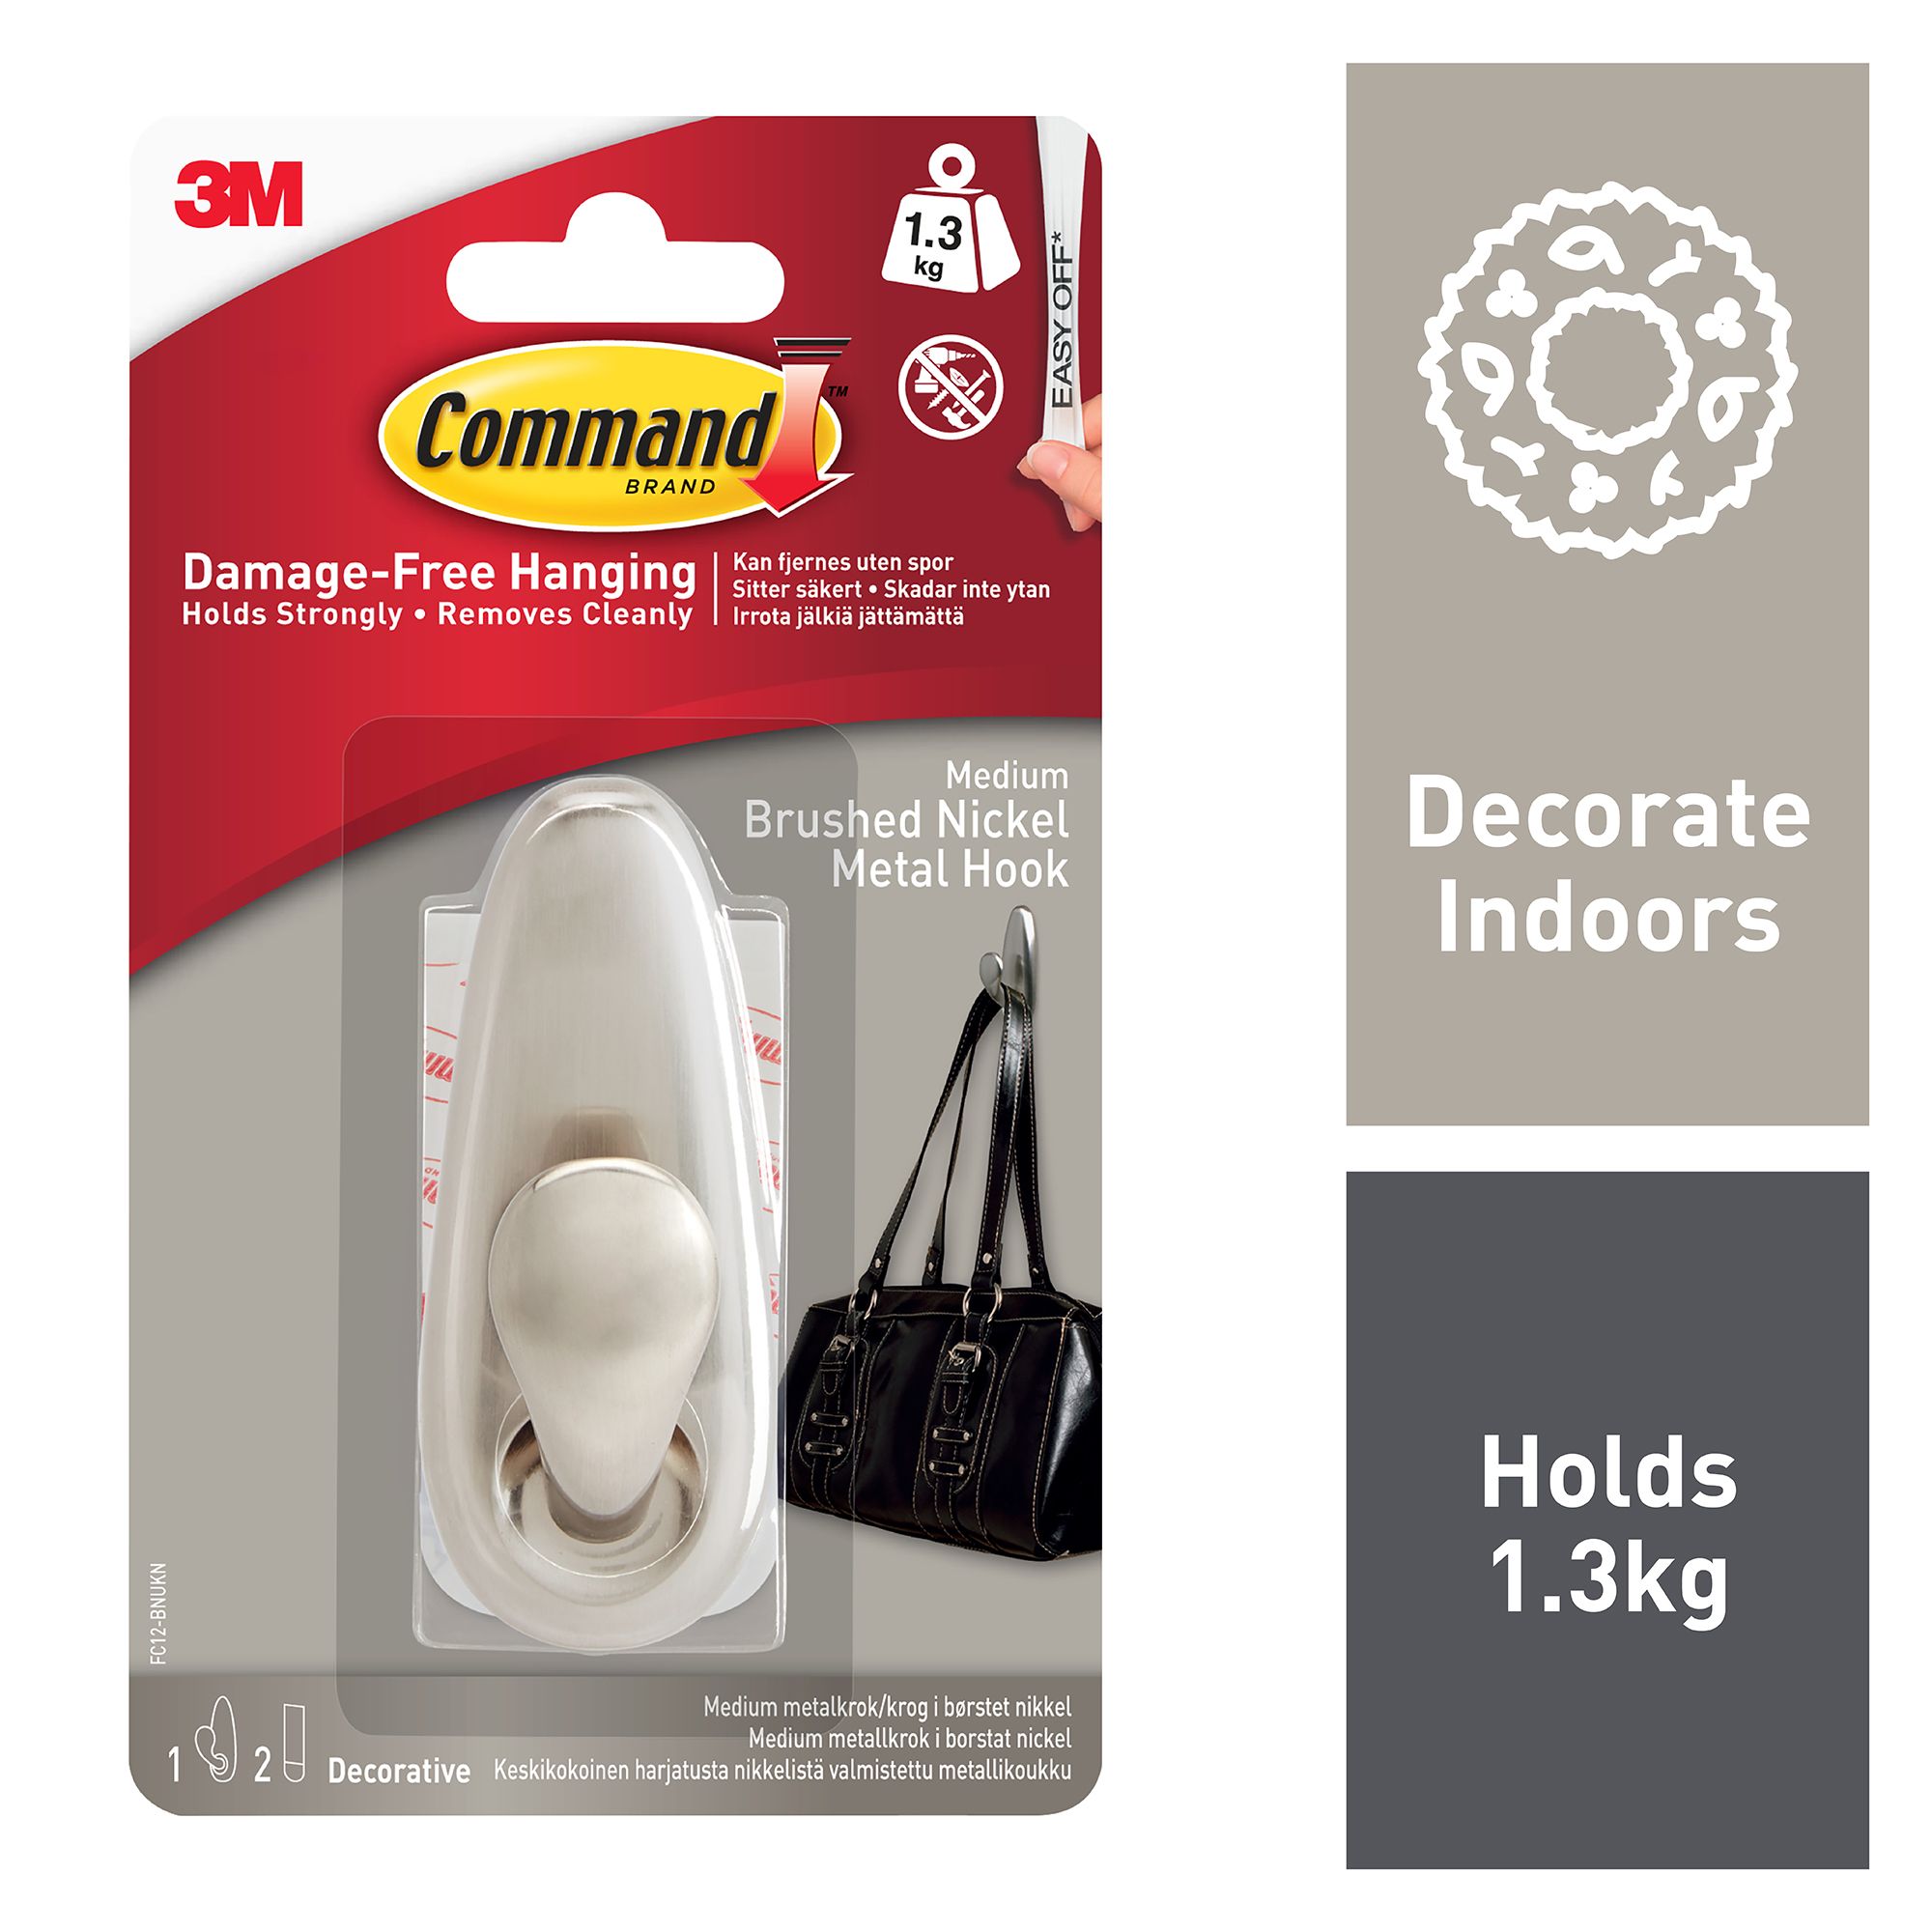 3M Command Forever classic Nickel effect Metal Medium Hook (Holds)1.3kg